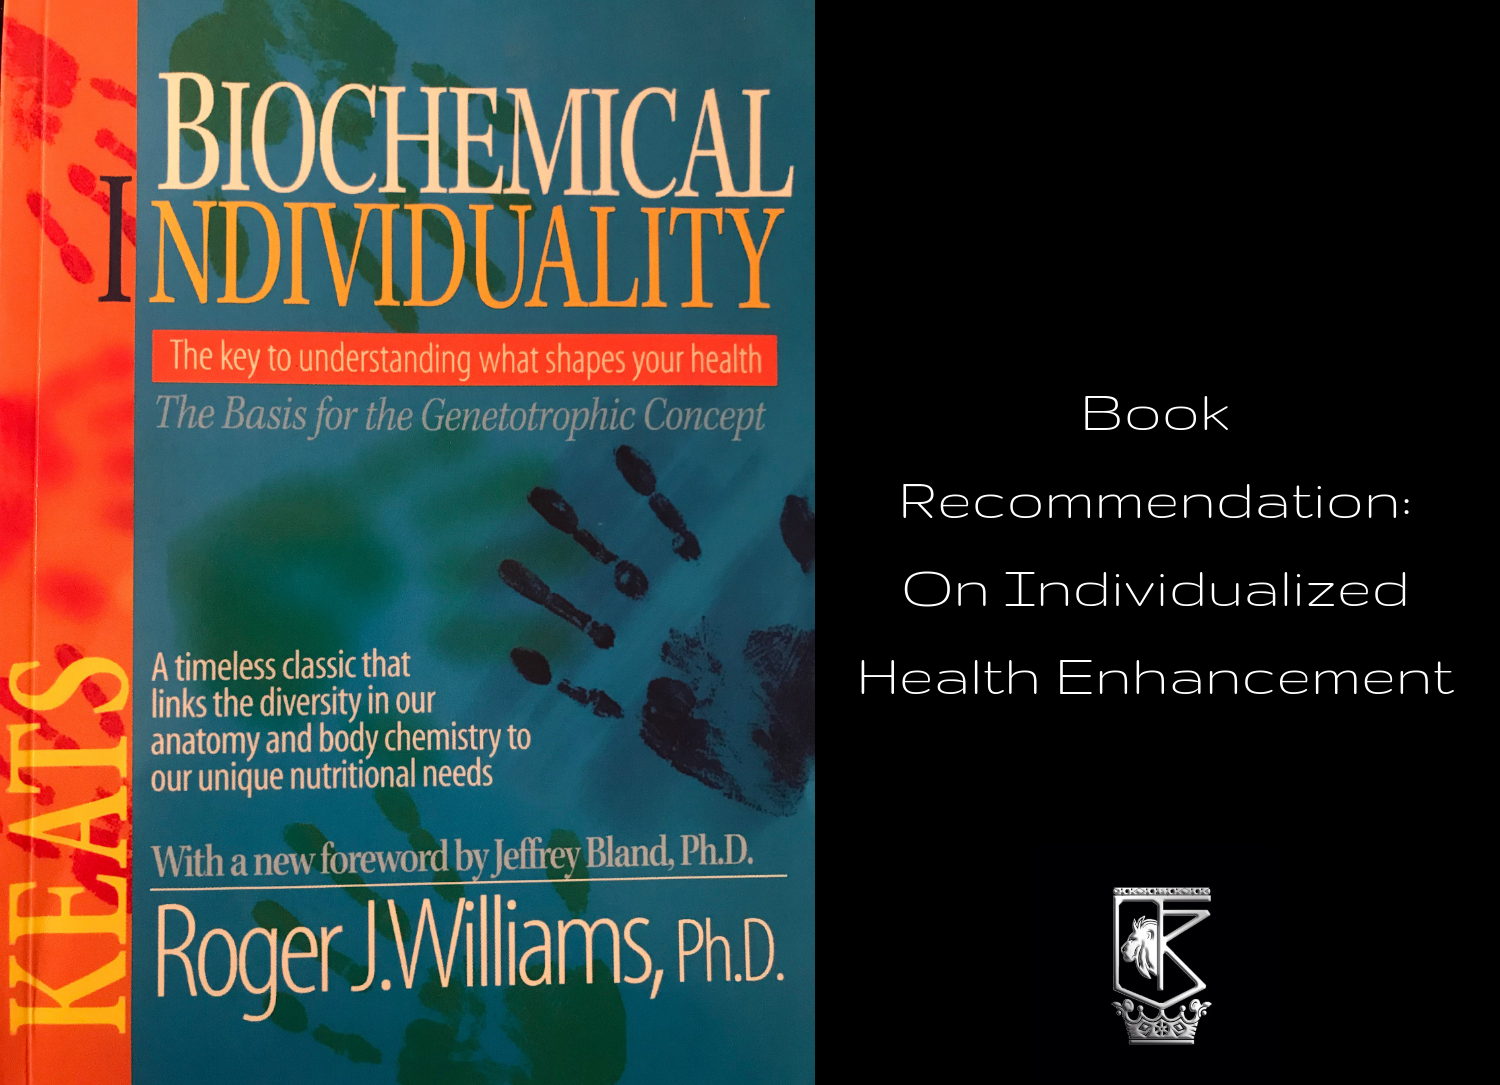 Book Recommendation on Individualized Health Enhancement